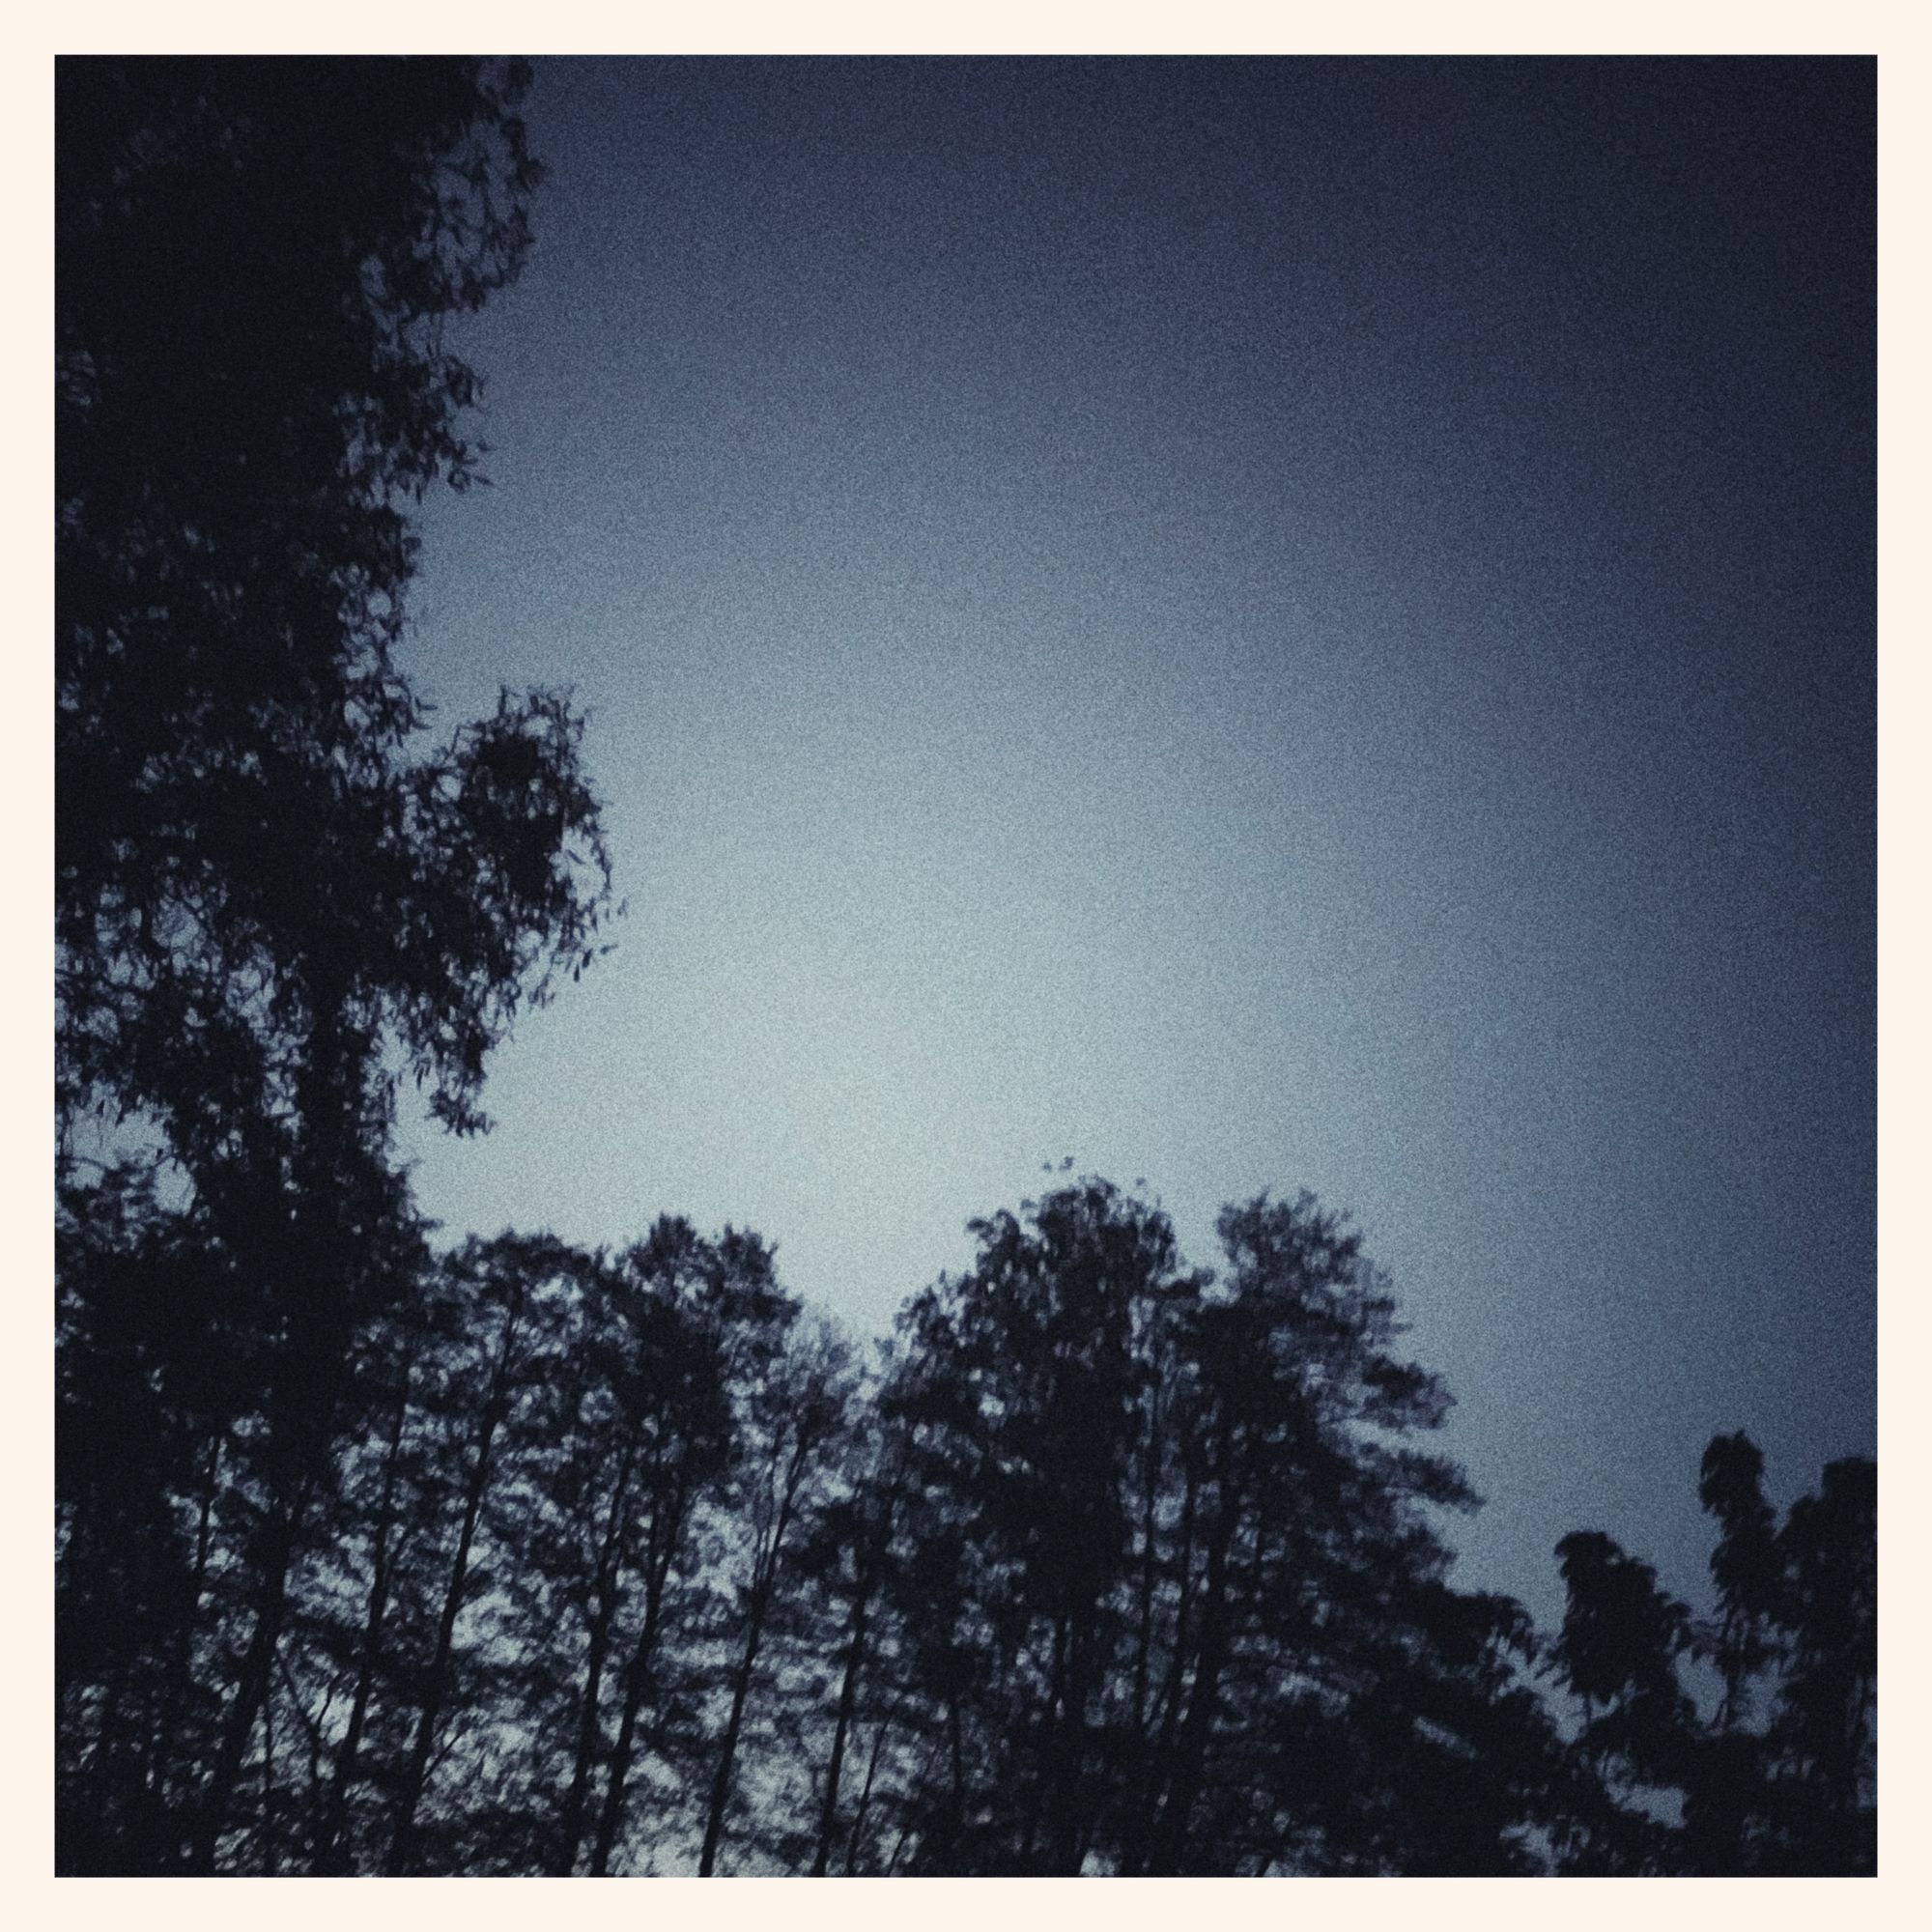 Late dusk sky, no clouds, above black trees.